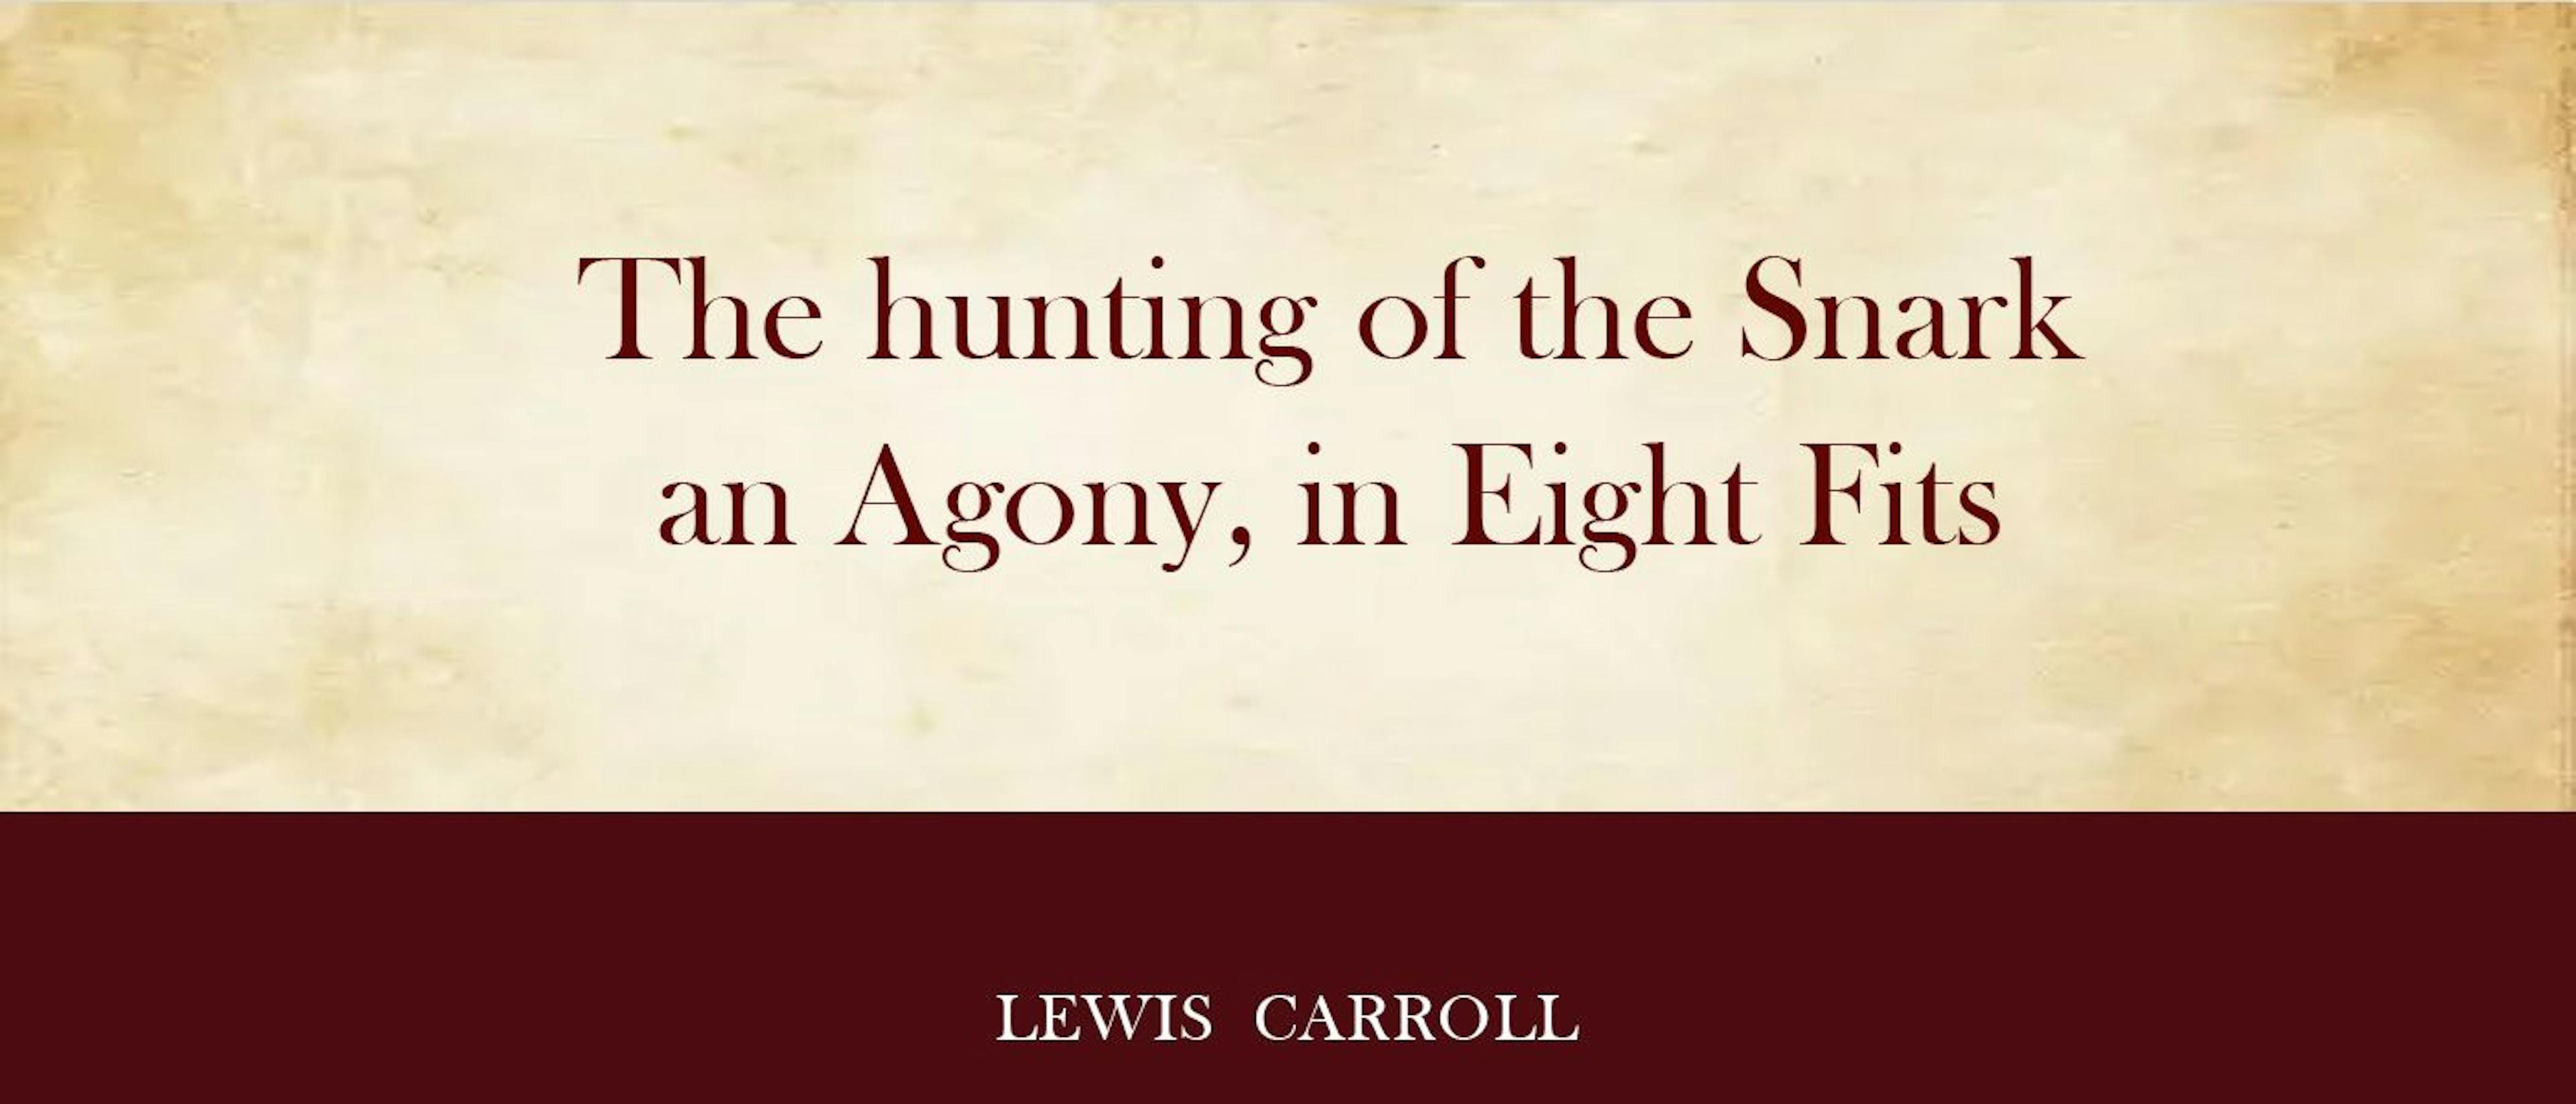 featured image - The Hunting of the Snark: An Agony in Eight Fits by Lewis Carroll - Table of Links